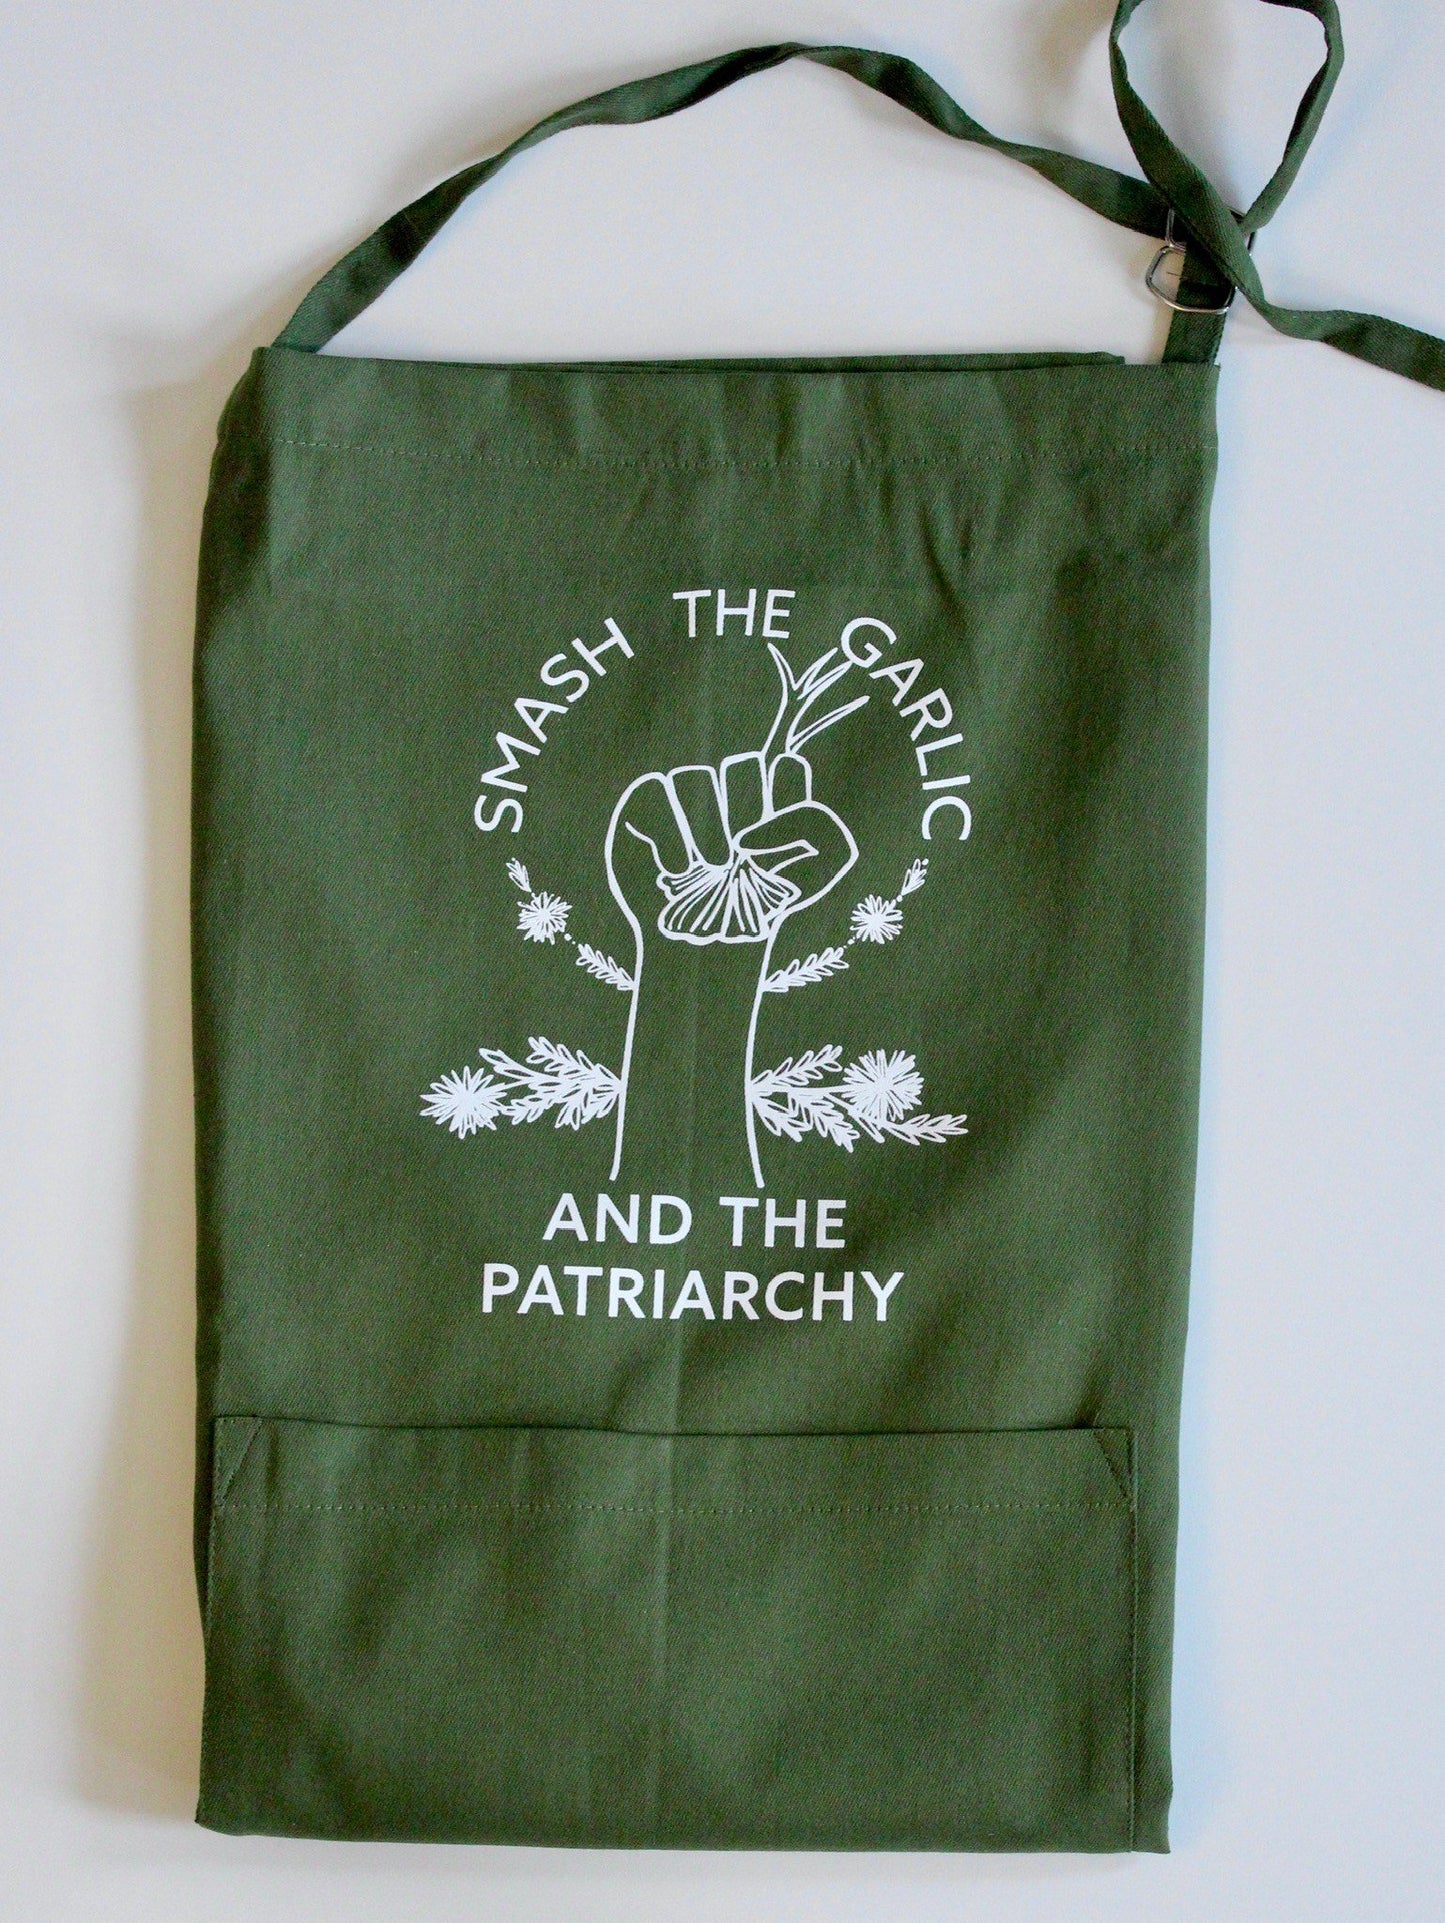 A folded dark green apron with the words "Smash the Garlic and the Patriarchy" and an illustration of a hand holding garlic 